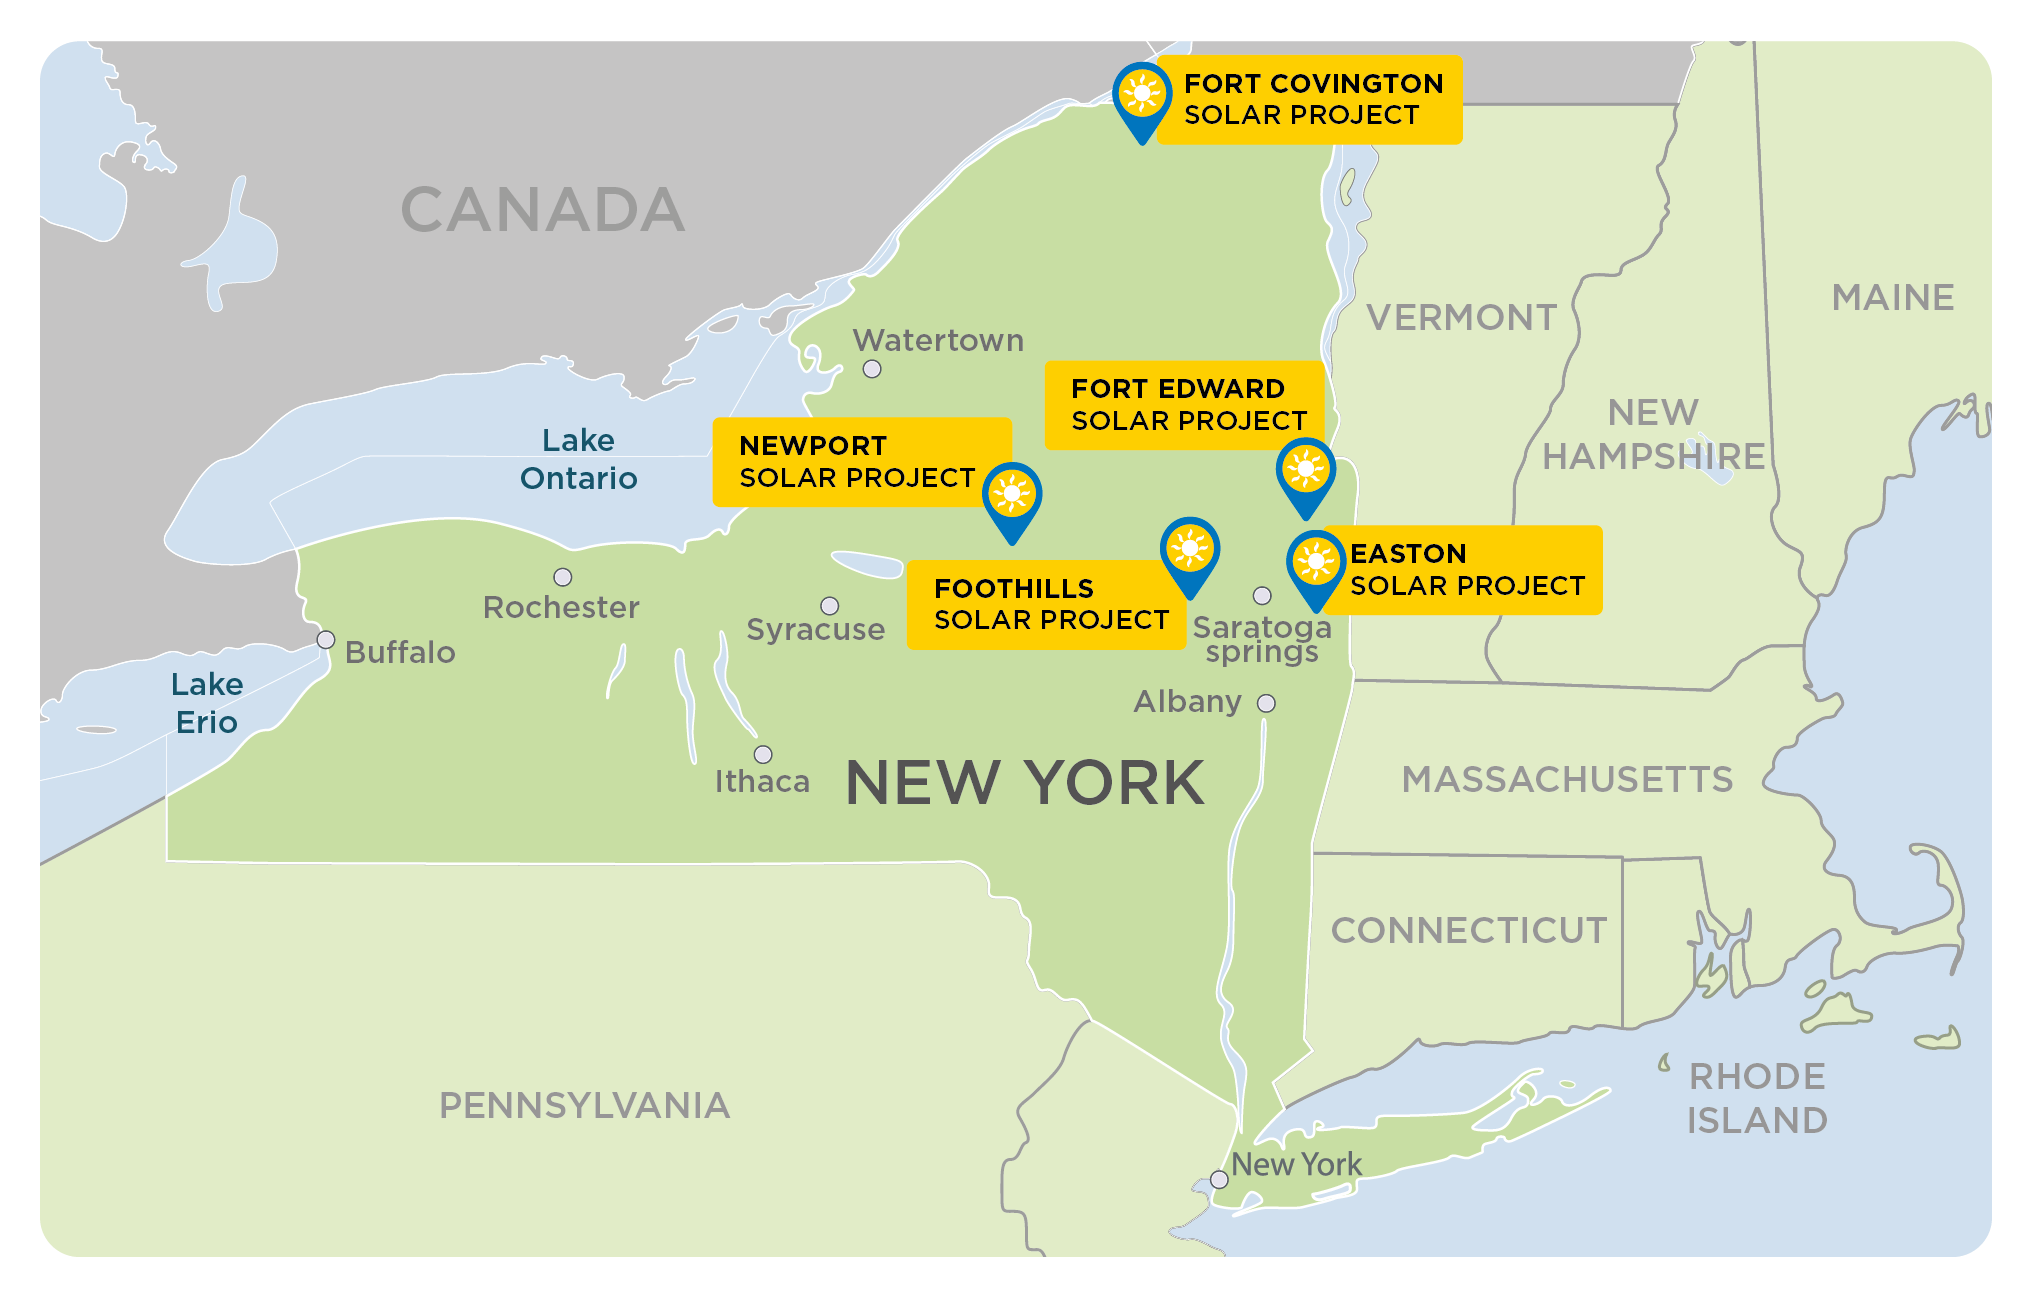 Five Boralex Solar Farms Totaling 540 MW of Electric Generation and 77 MW of Storage Selected Under a Request for Proposals in New York State